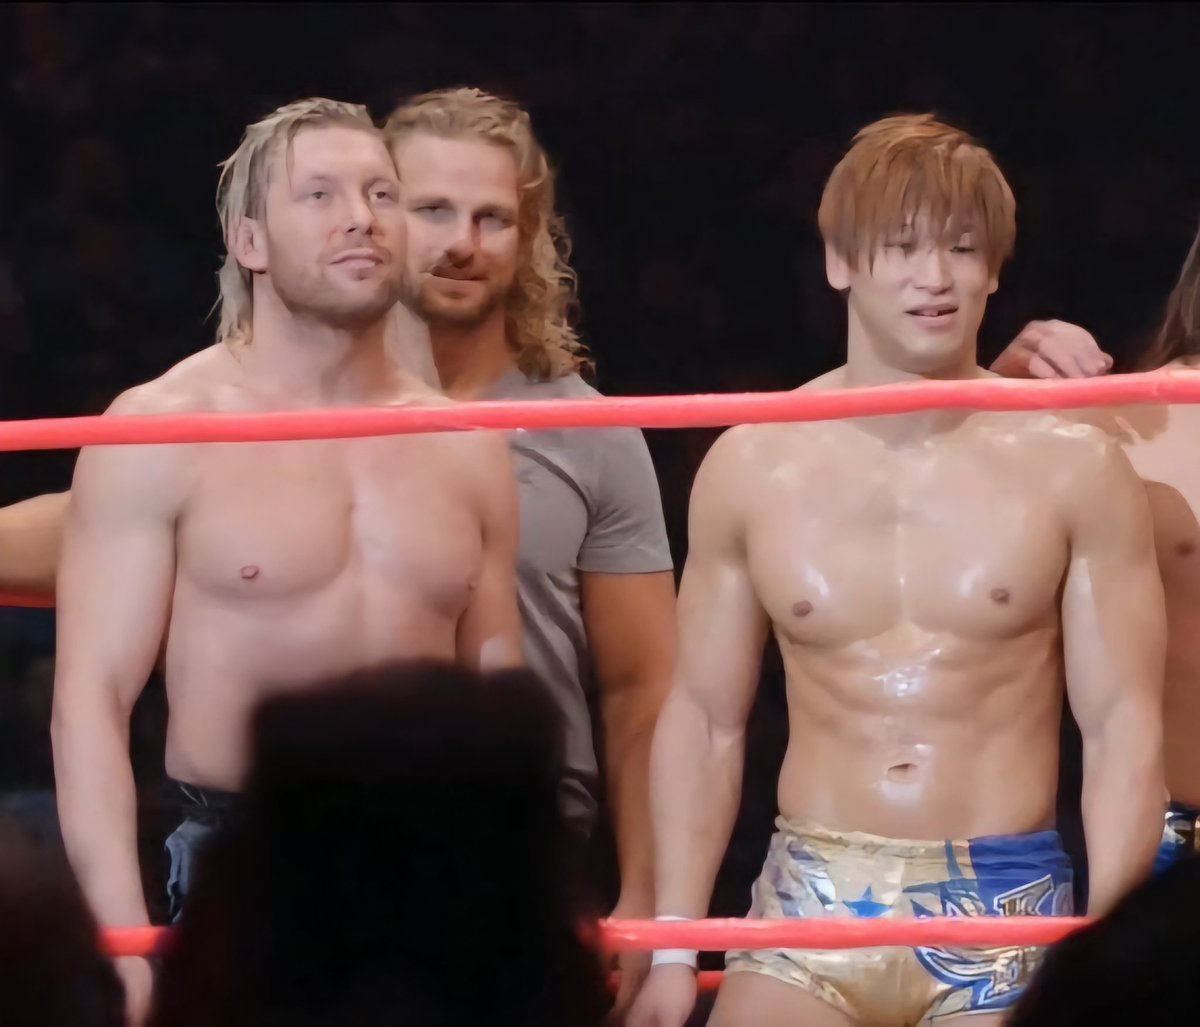 Can't wait for these three to come back and confront The new Elite !
This should be very interesting.

#AEW #KennyOmega #Ibushi #Hangman #TheElite #YoungBucks #Okada